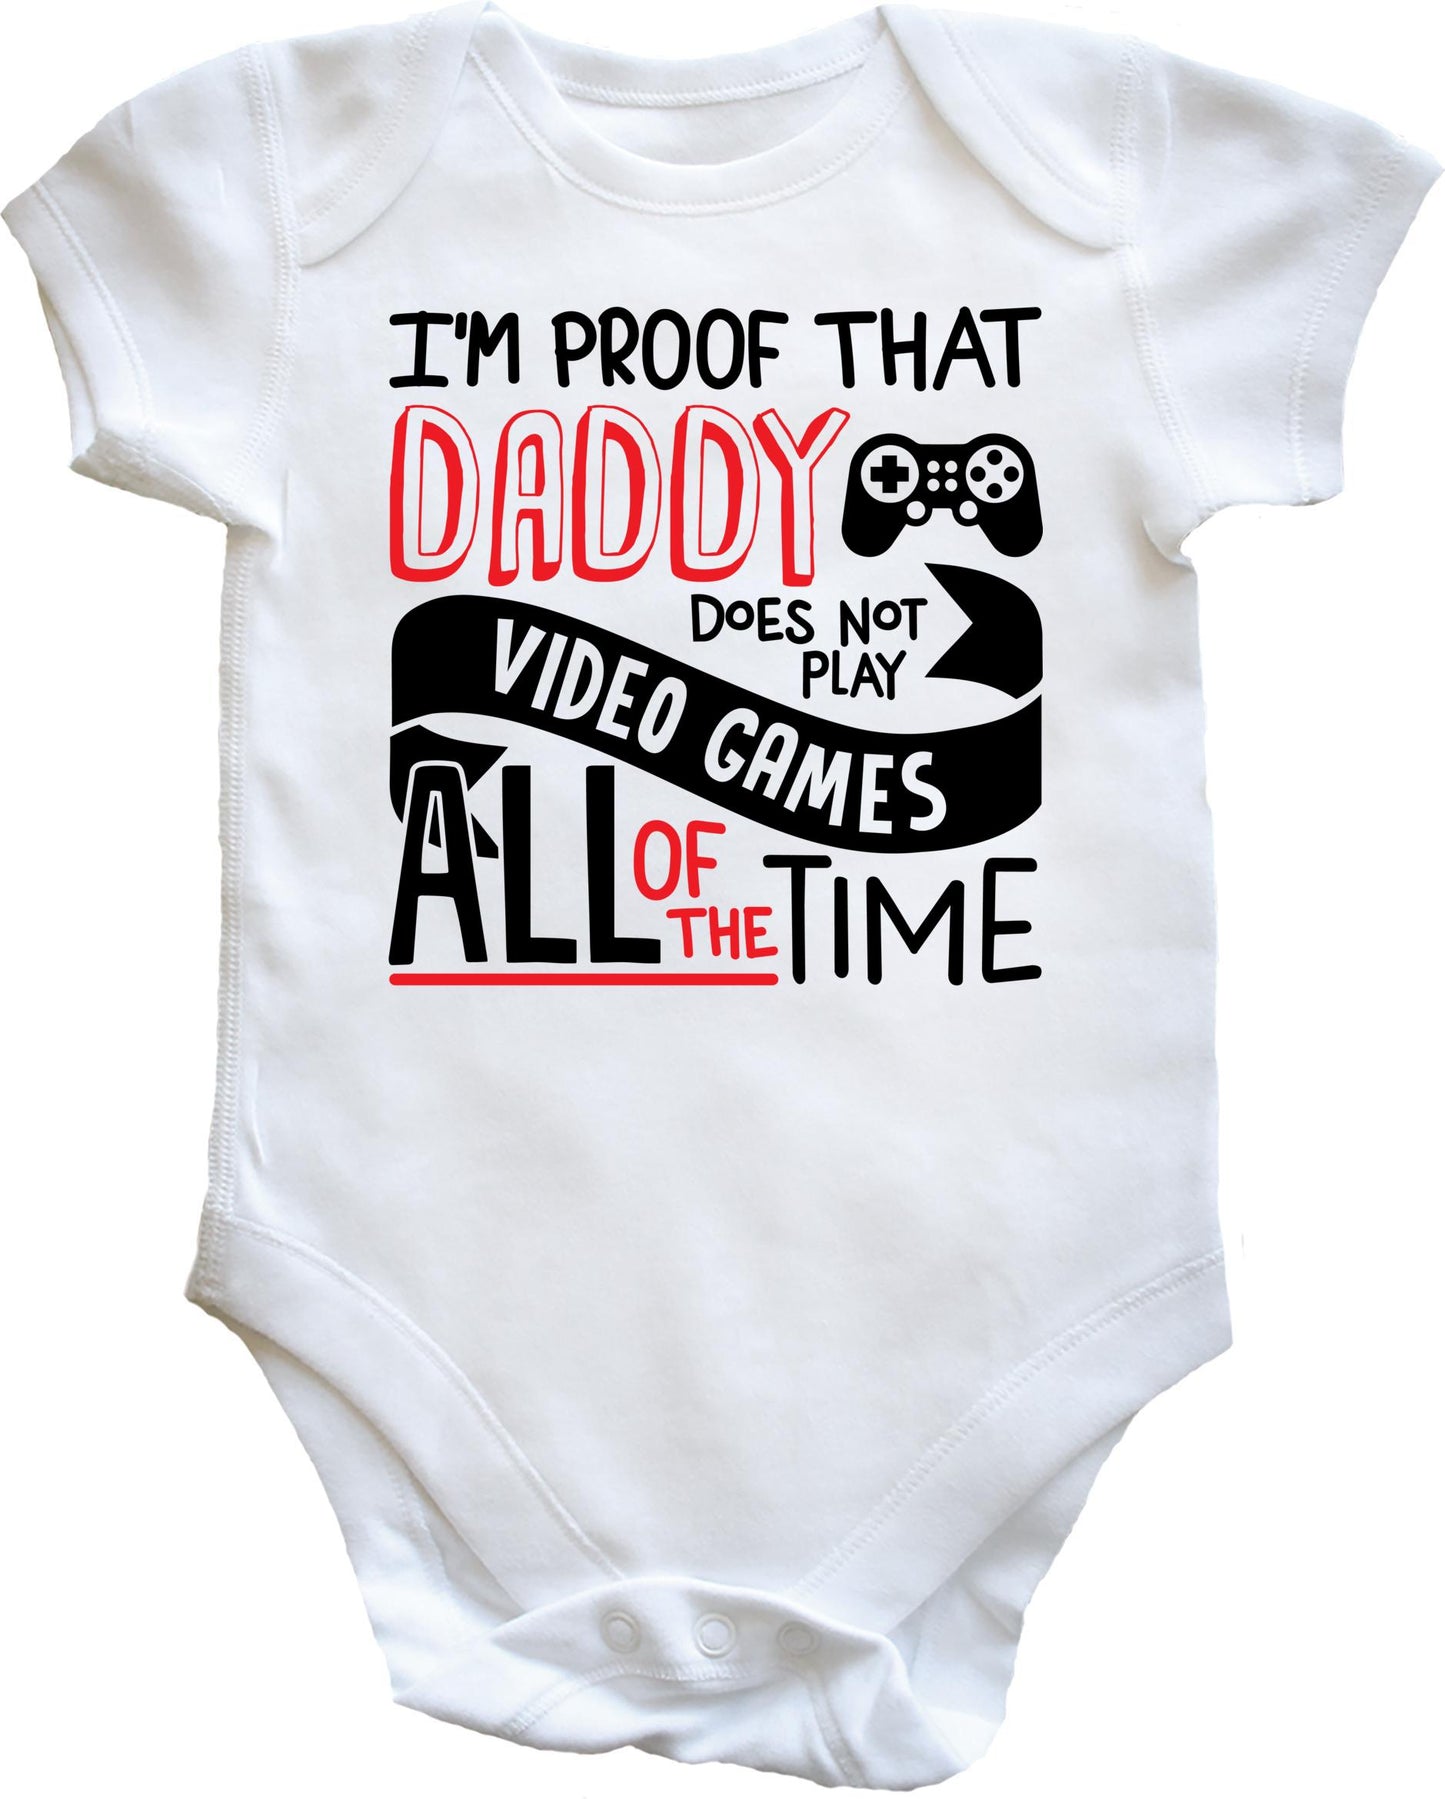 I'm Proof That Daddy Does Not Play Video Games All of the Time baby vest